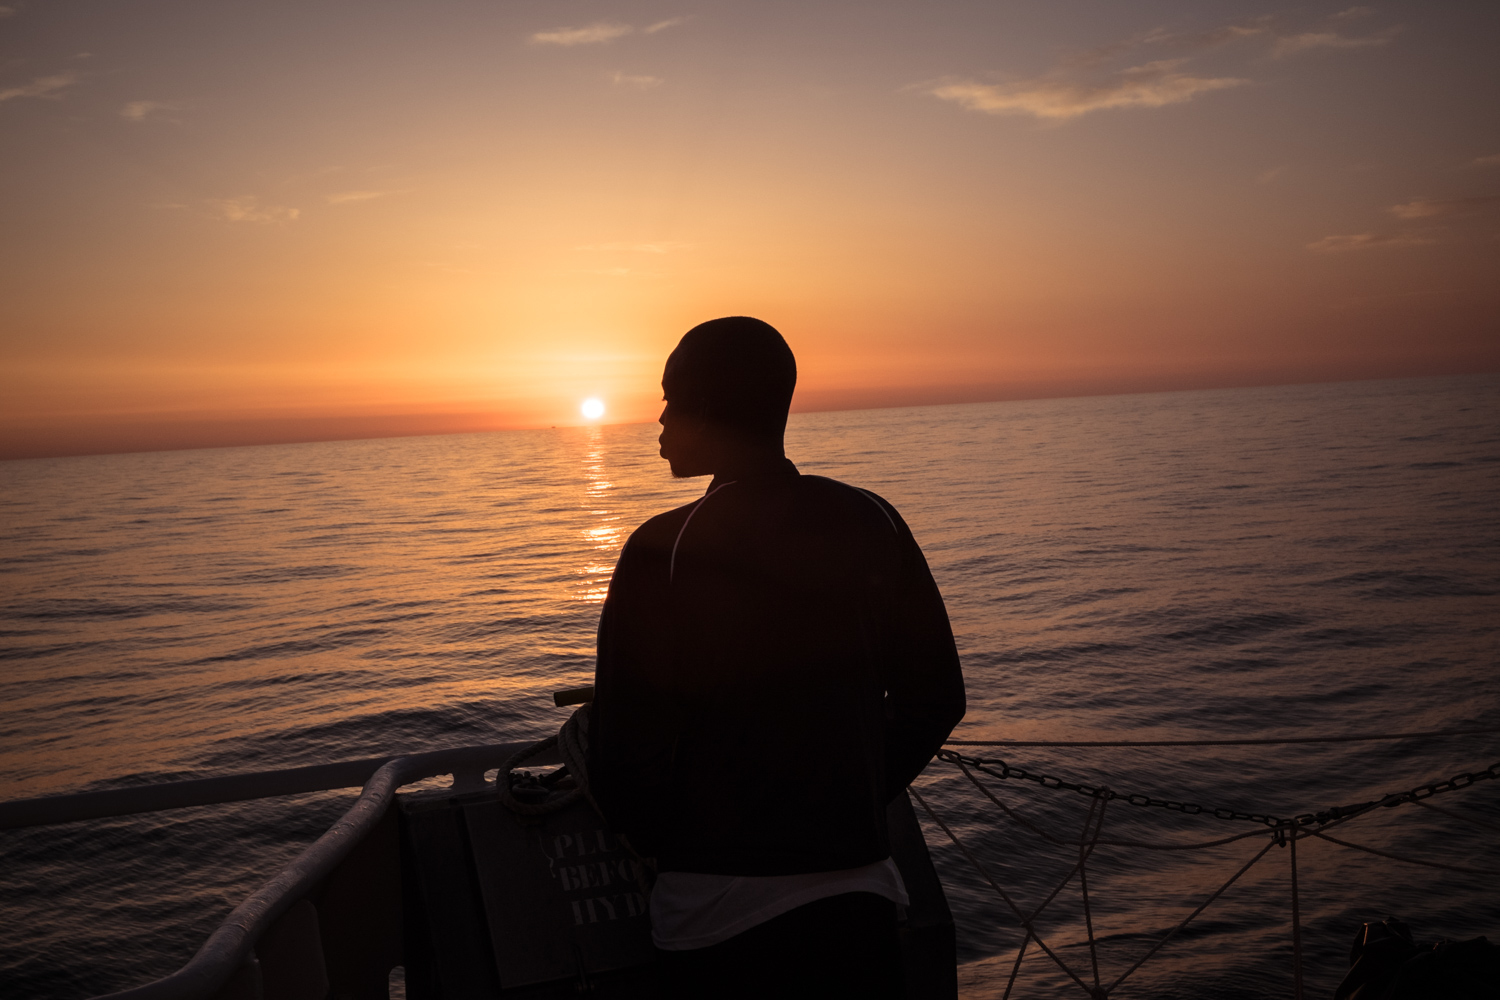 On February 23rd 2017, at sunrise, a young migrant observes the sea from the Aquarius.